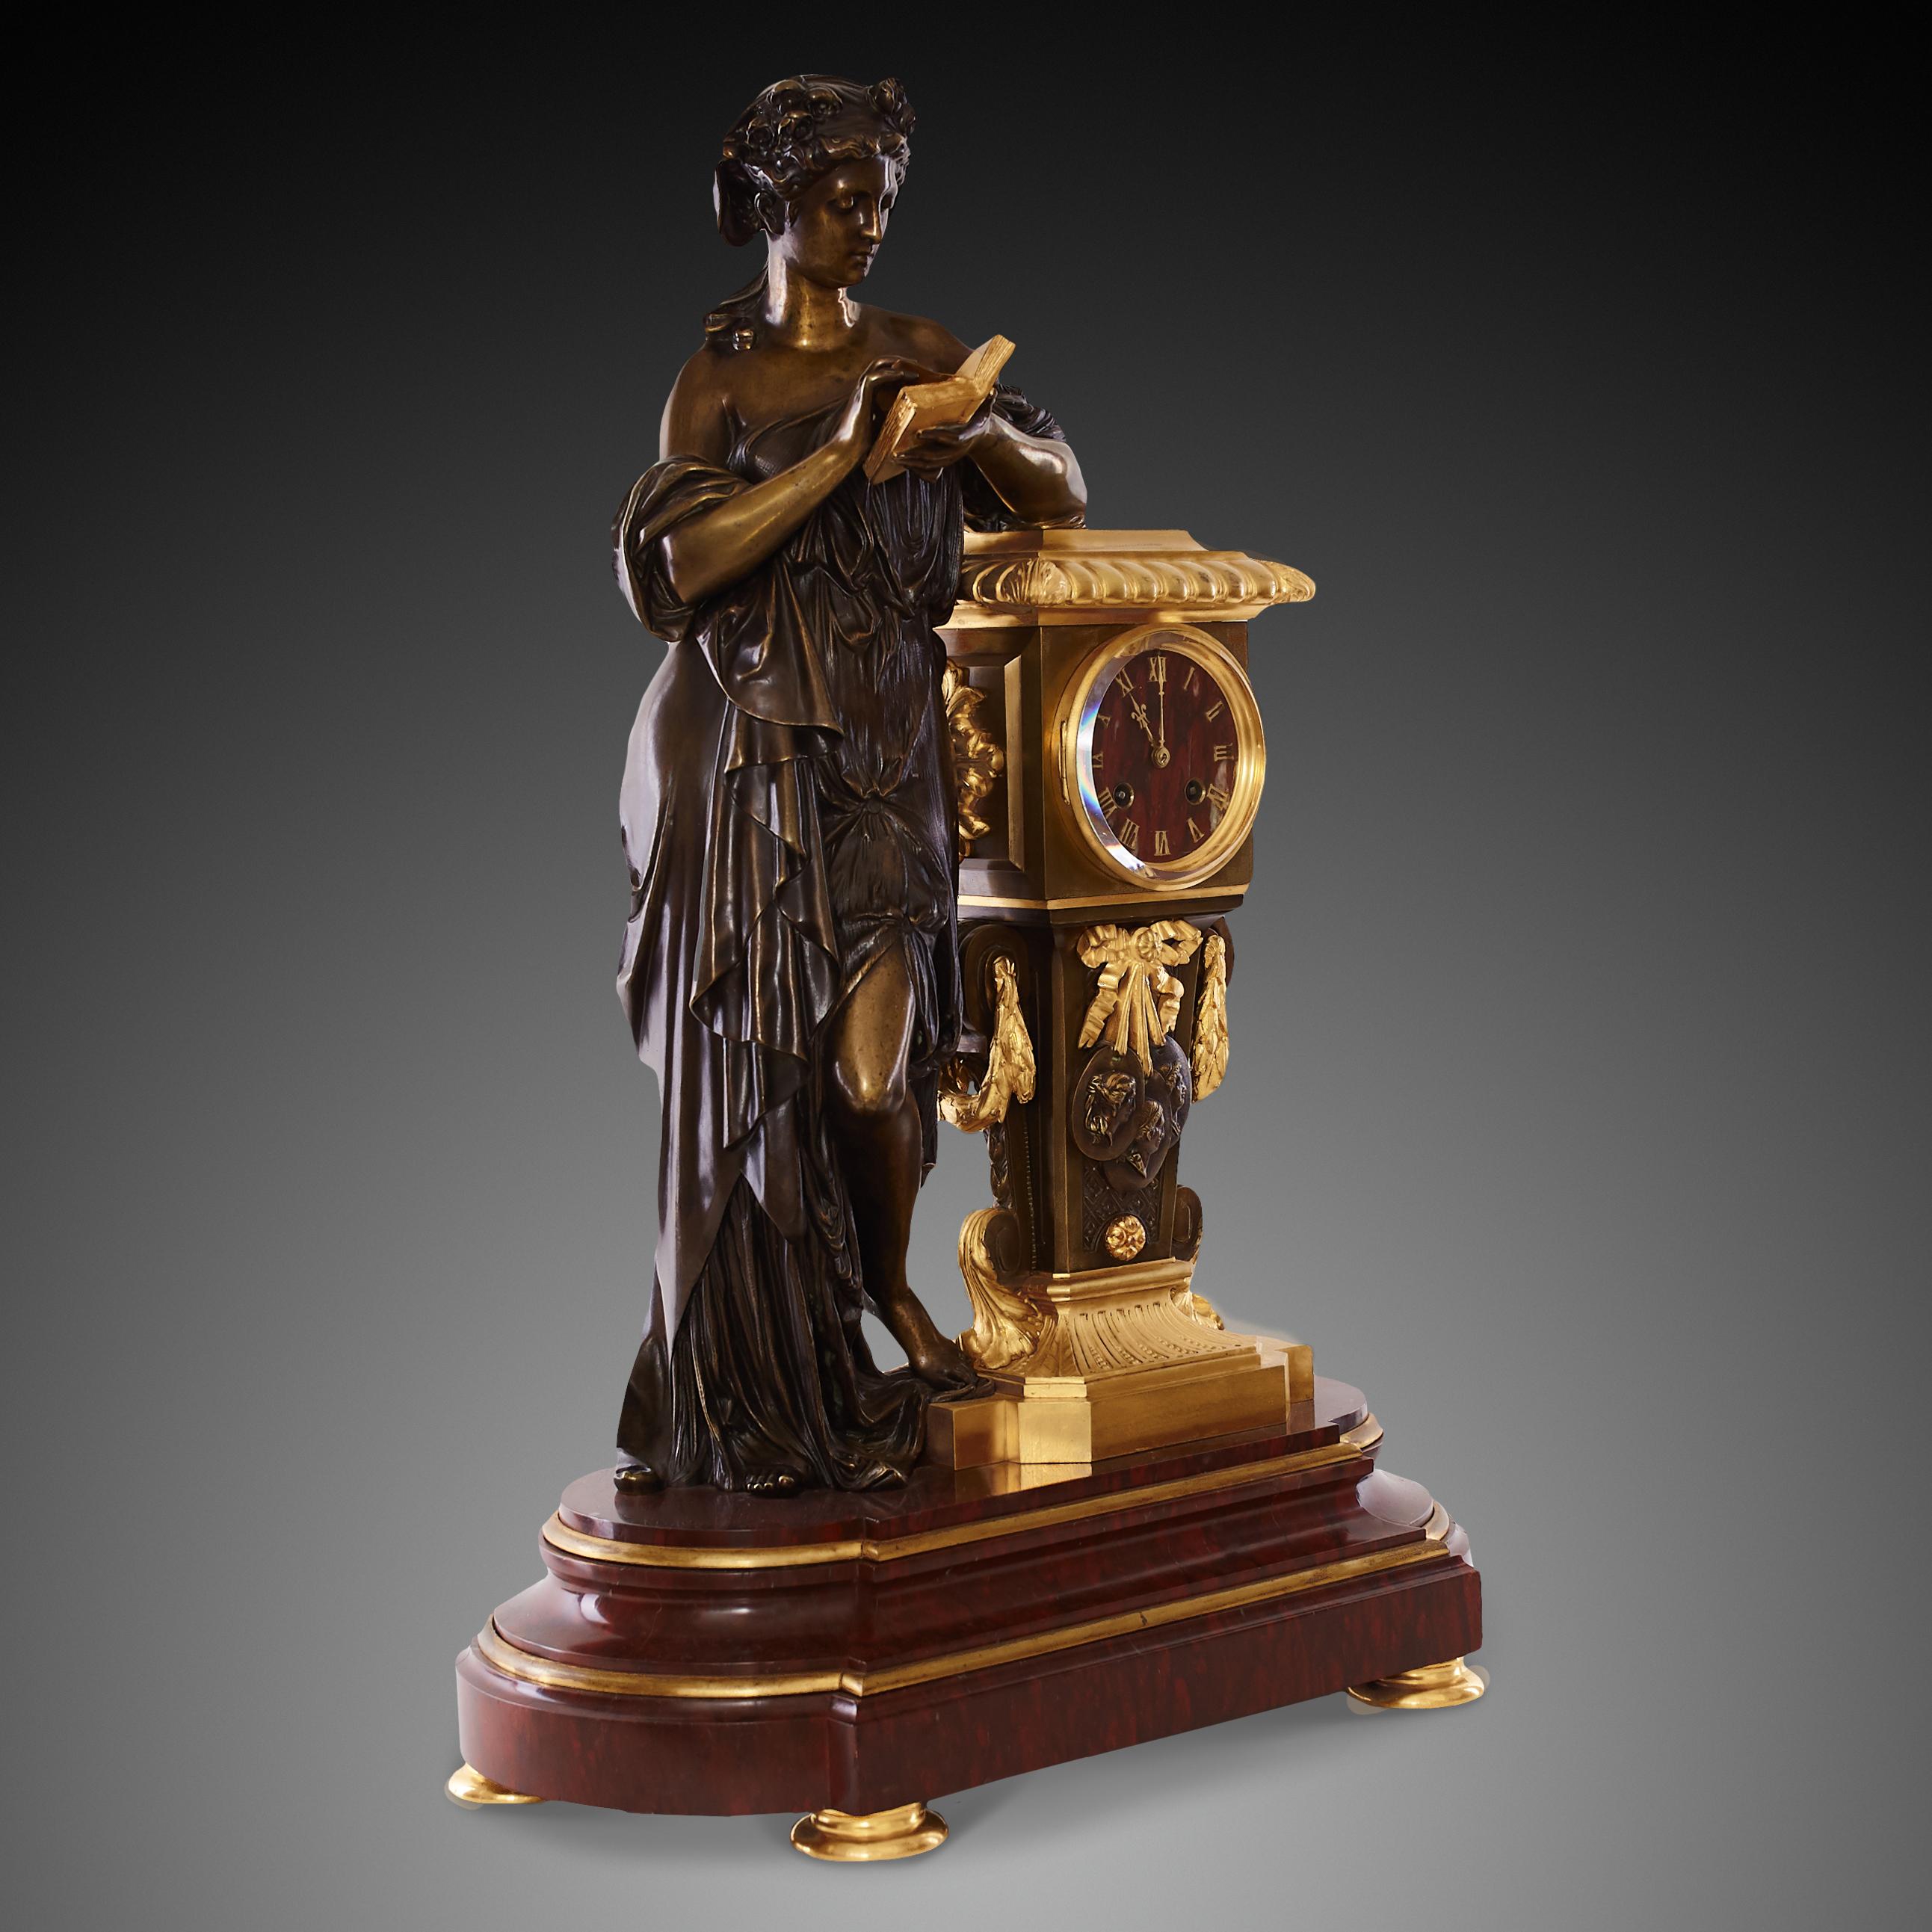 Beautifully decorated clock in the color of walnut with a figure of a woman reading a book, all set on brown marble
Details of the movement mechanism: Eight days there is a pendulum hanging. He struck an hour and a half on the bell. The clock is